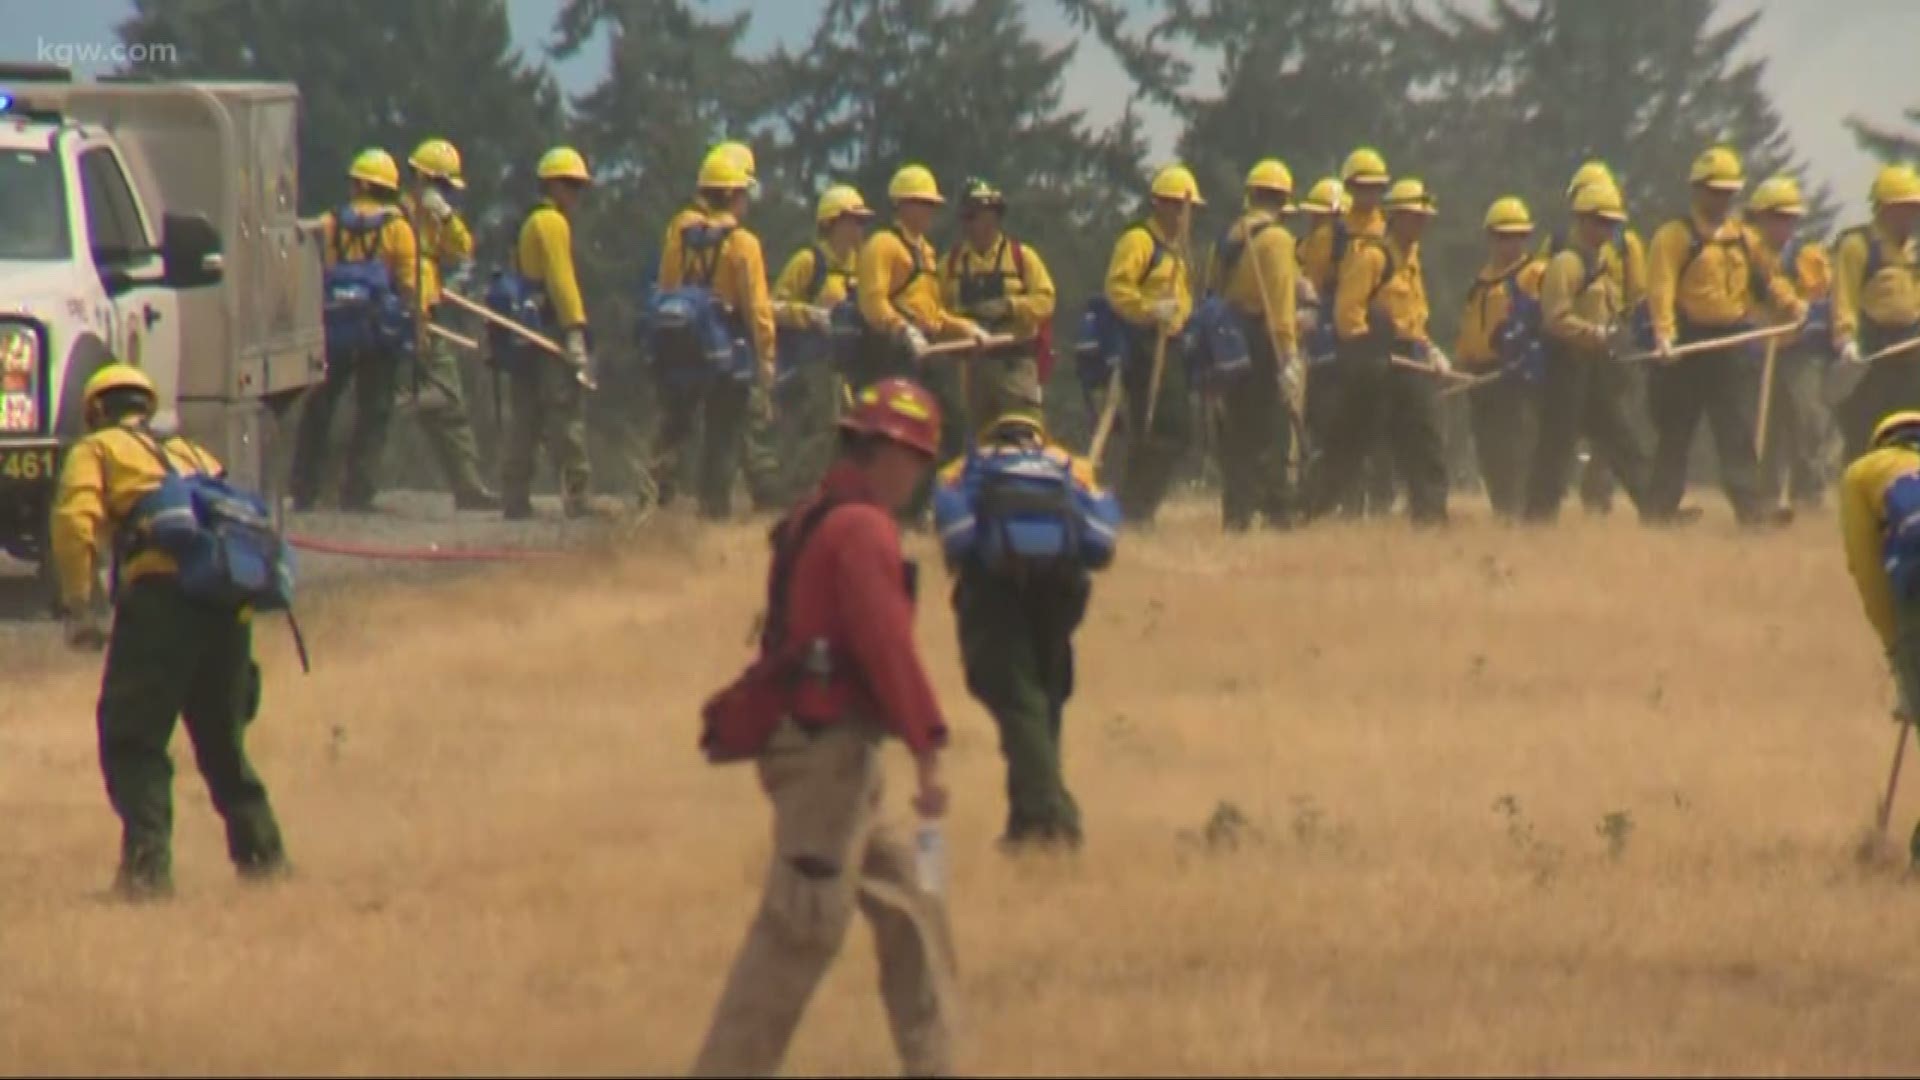 During a busy wildfire season, the Oregon National Guard offers firefighting training.